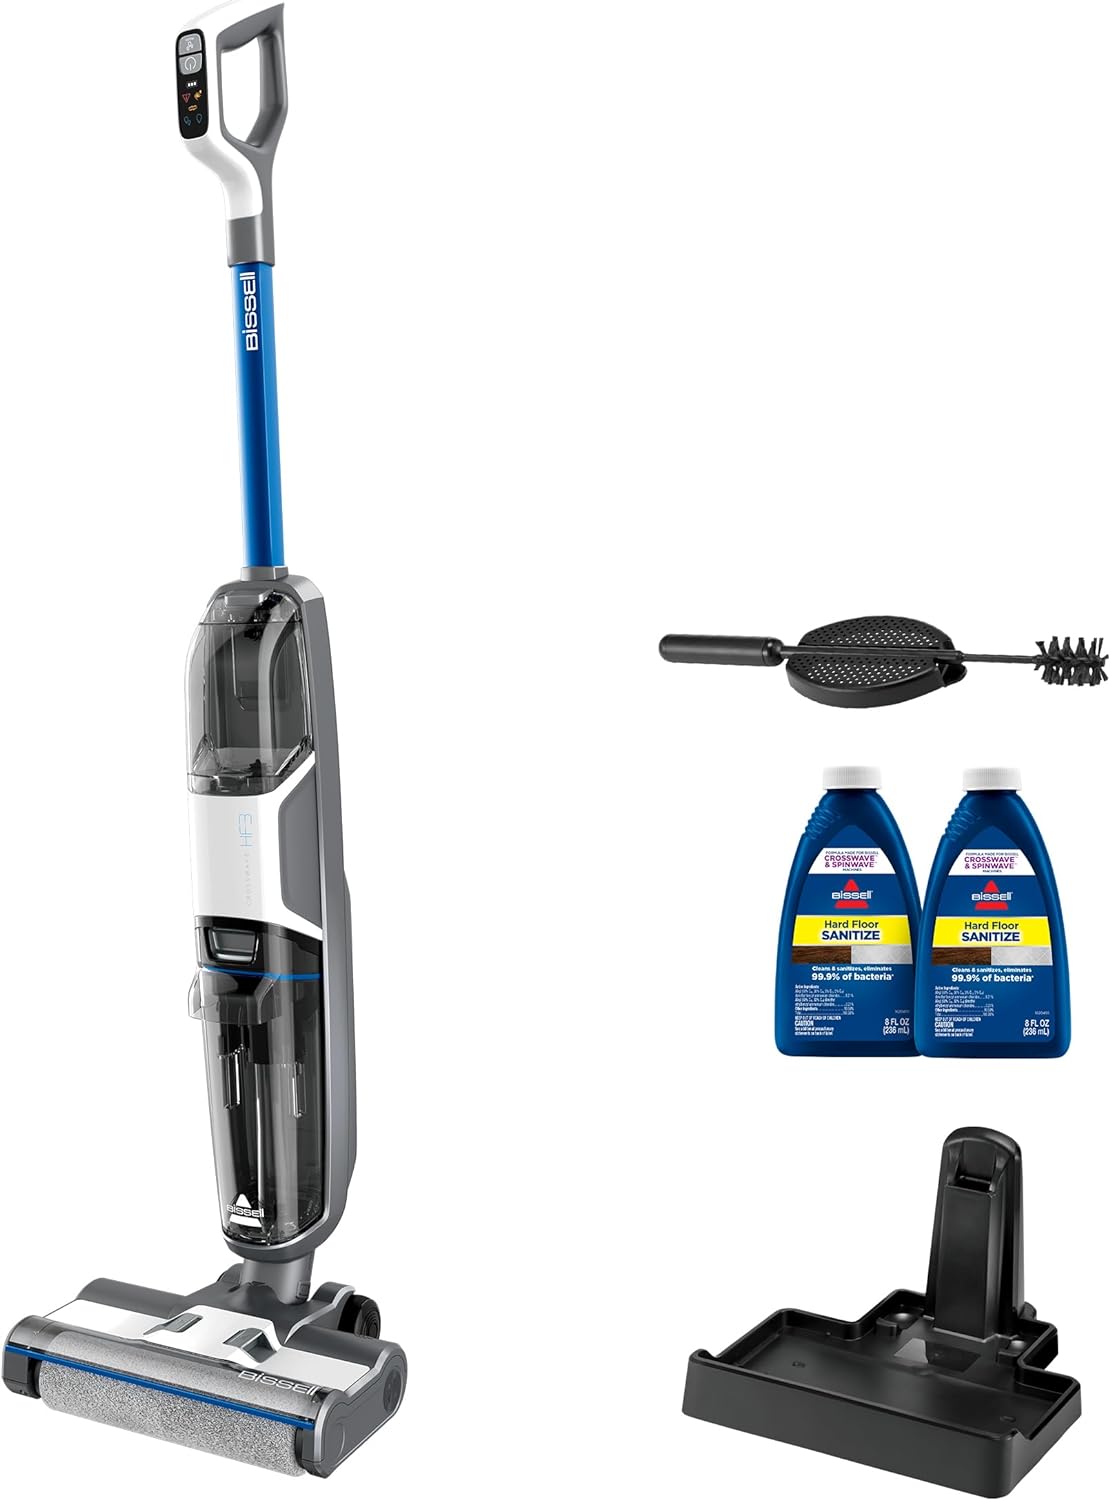 BISSELL Crosswave HF3 Cordless Wet/Dry Vacuum Cleaner and Mop, Multi-Surface and Hardwood Floor Cleaner, 3649A,White/Blue/Black